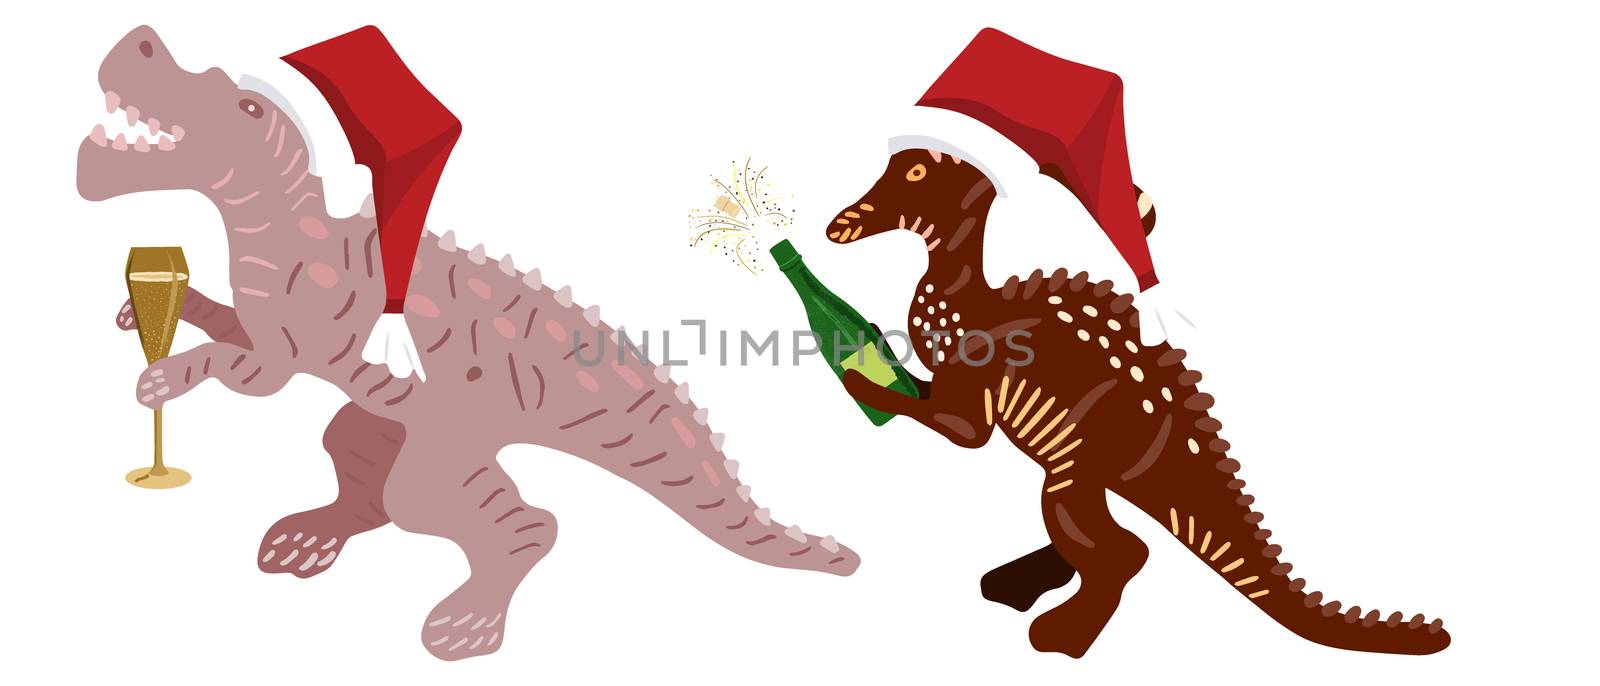 Cute Christmas Dinosaur with Champagne and red Santa hats isolated on white background. Merry Christmas and Happy New Year composition. Design print for cards, stickers, apparel, home decor. Vector.